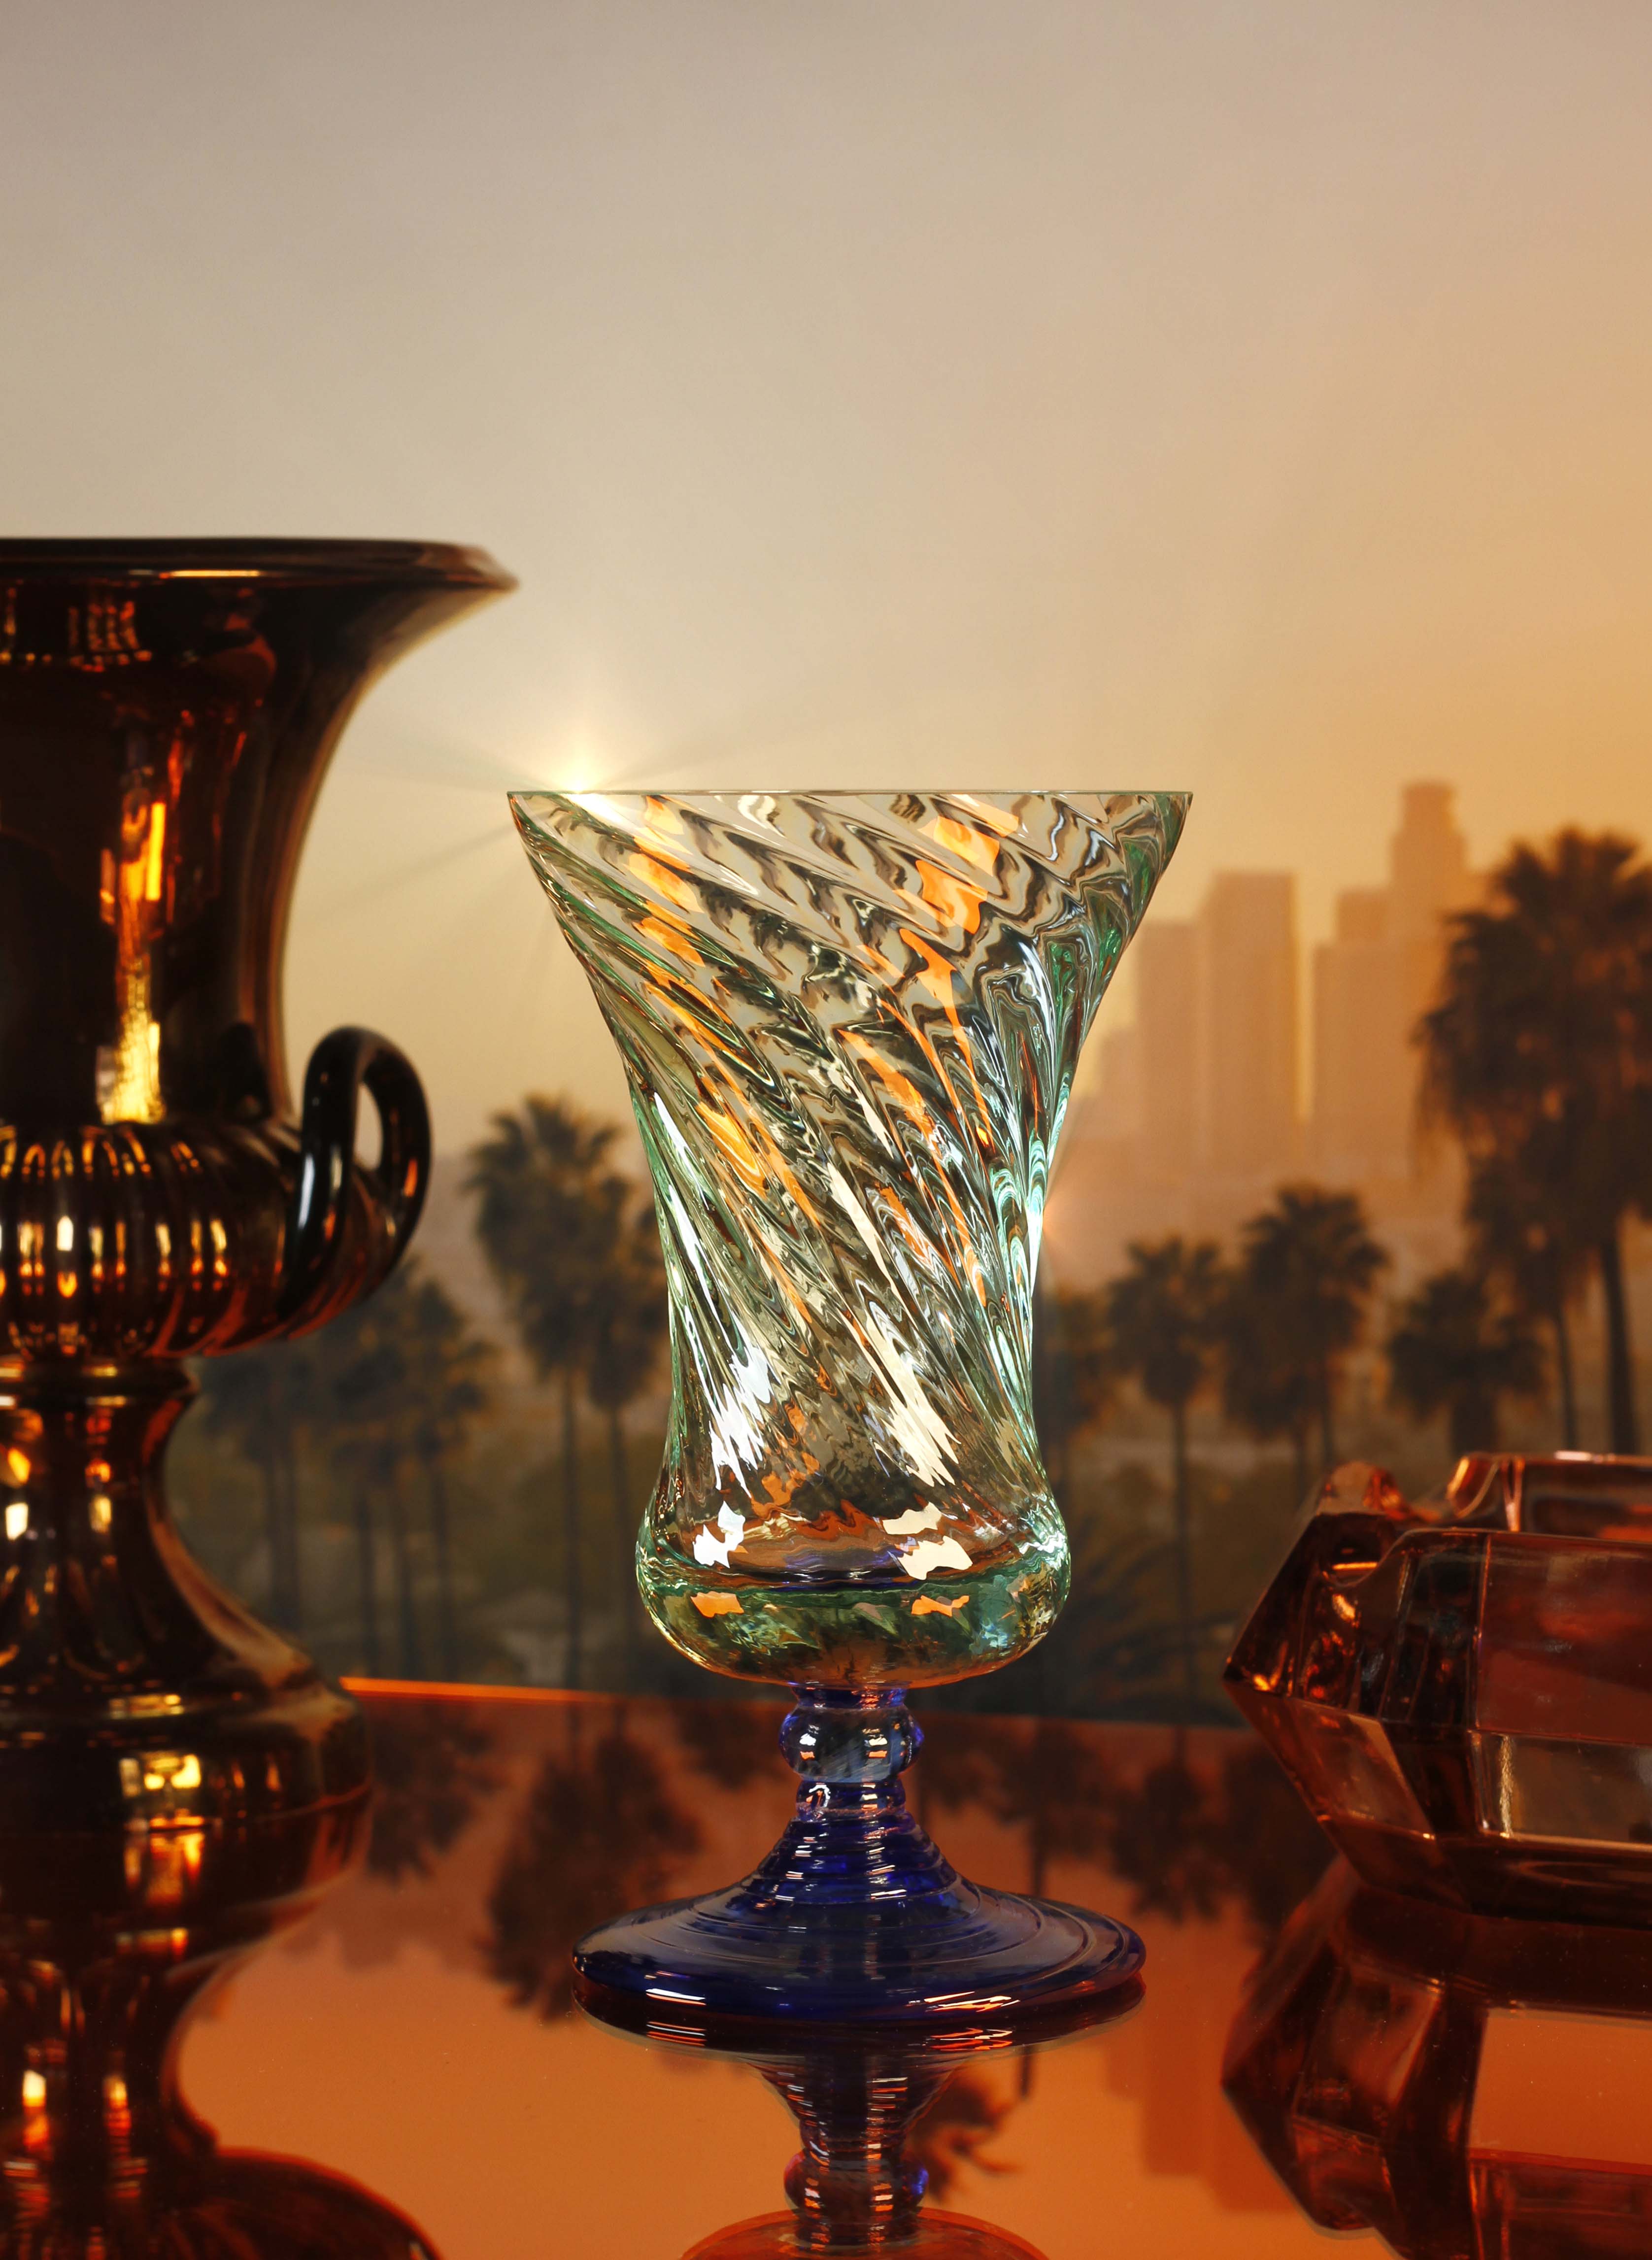 Gergei Erdei Hollywood 1970s inspired glassware with LA in the background